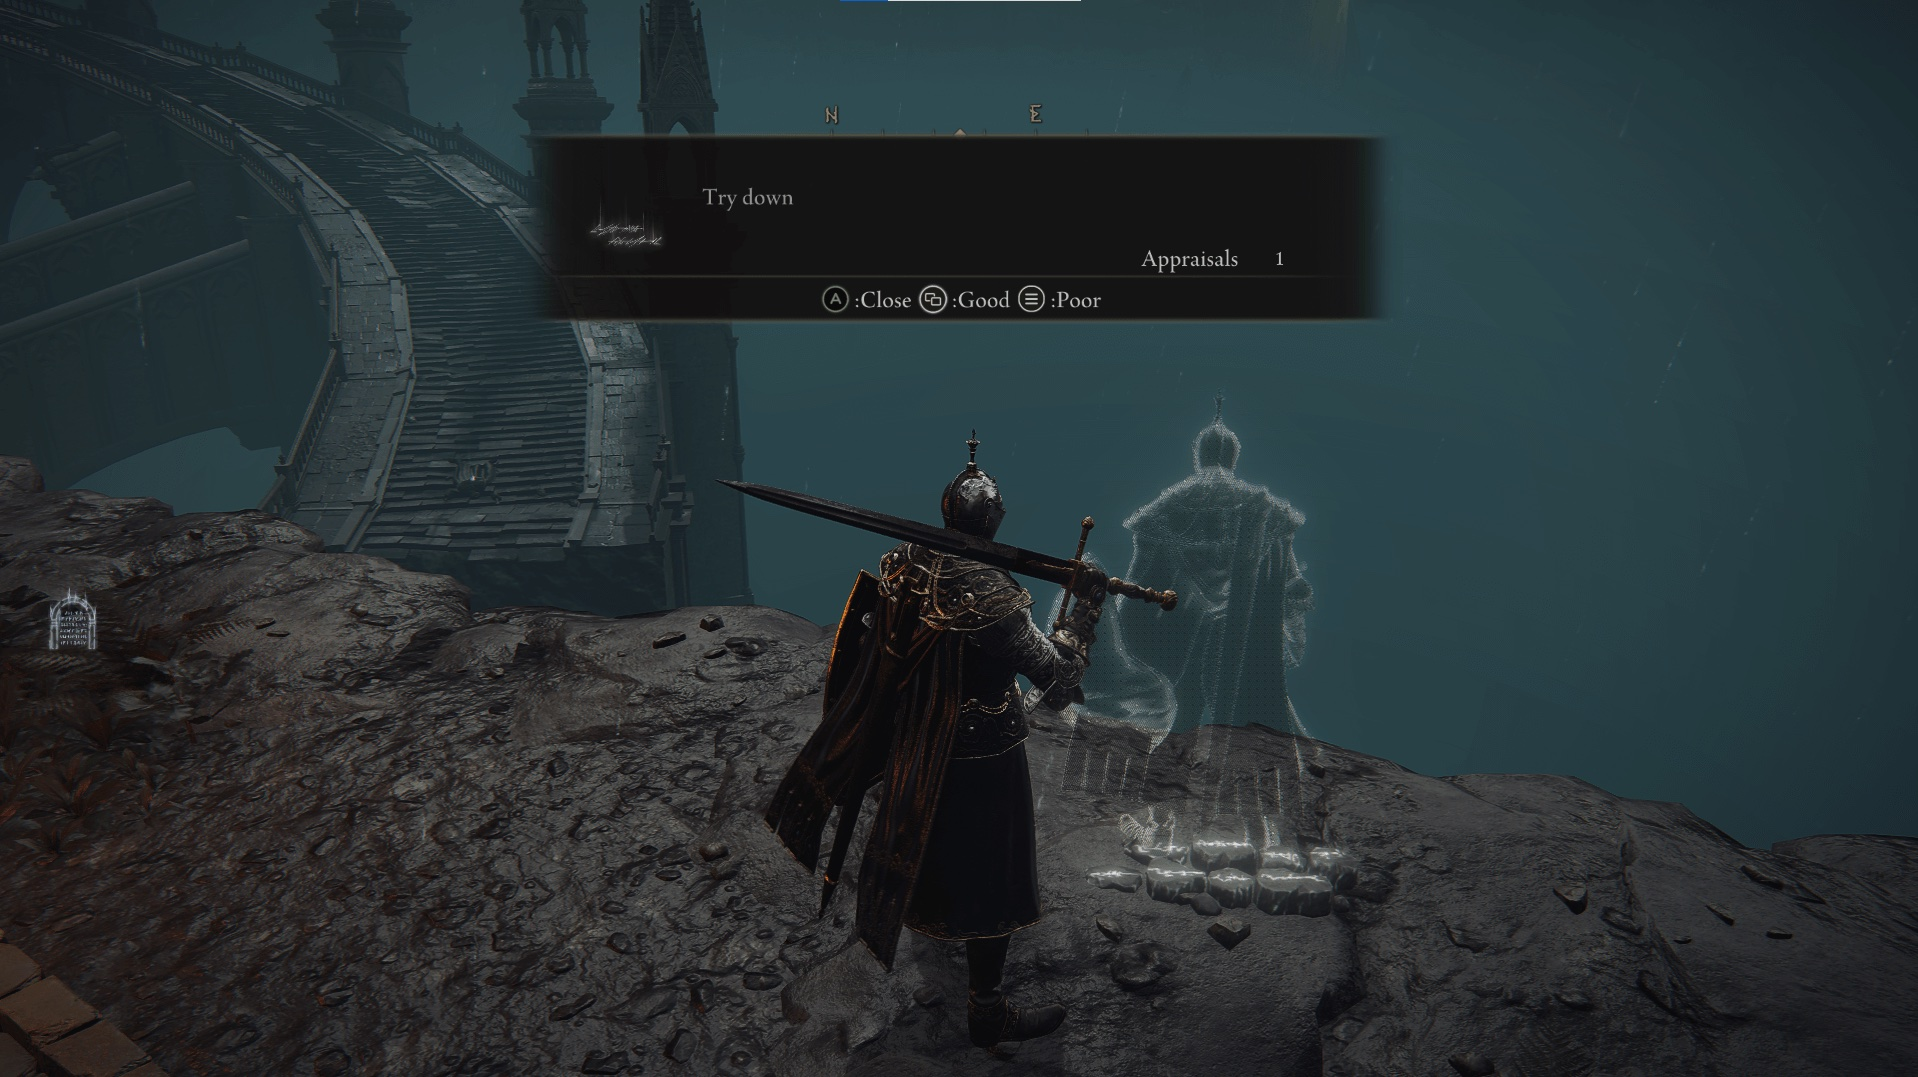 Games like Dark Souls or Elden Ring present a stigmergic dynamic, where players leave messages for other players asynchronously to help them in the orientation and exploration.